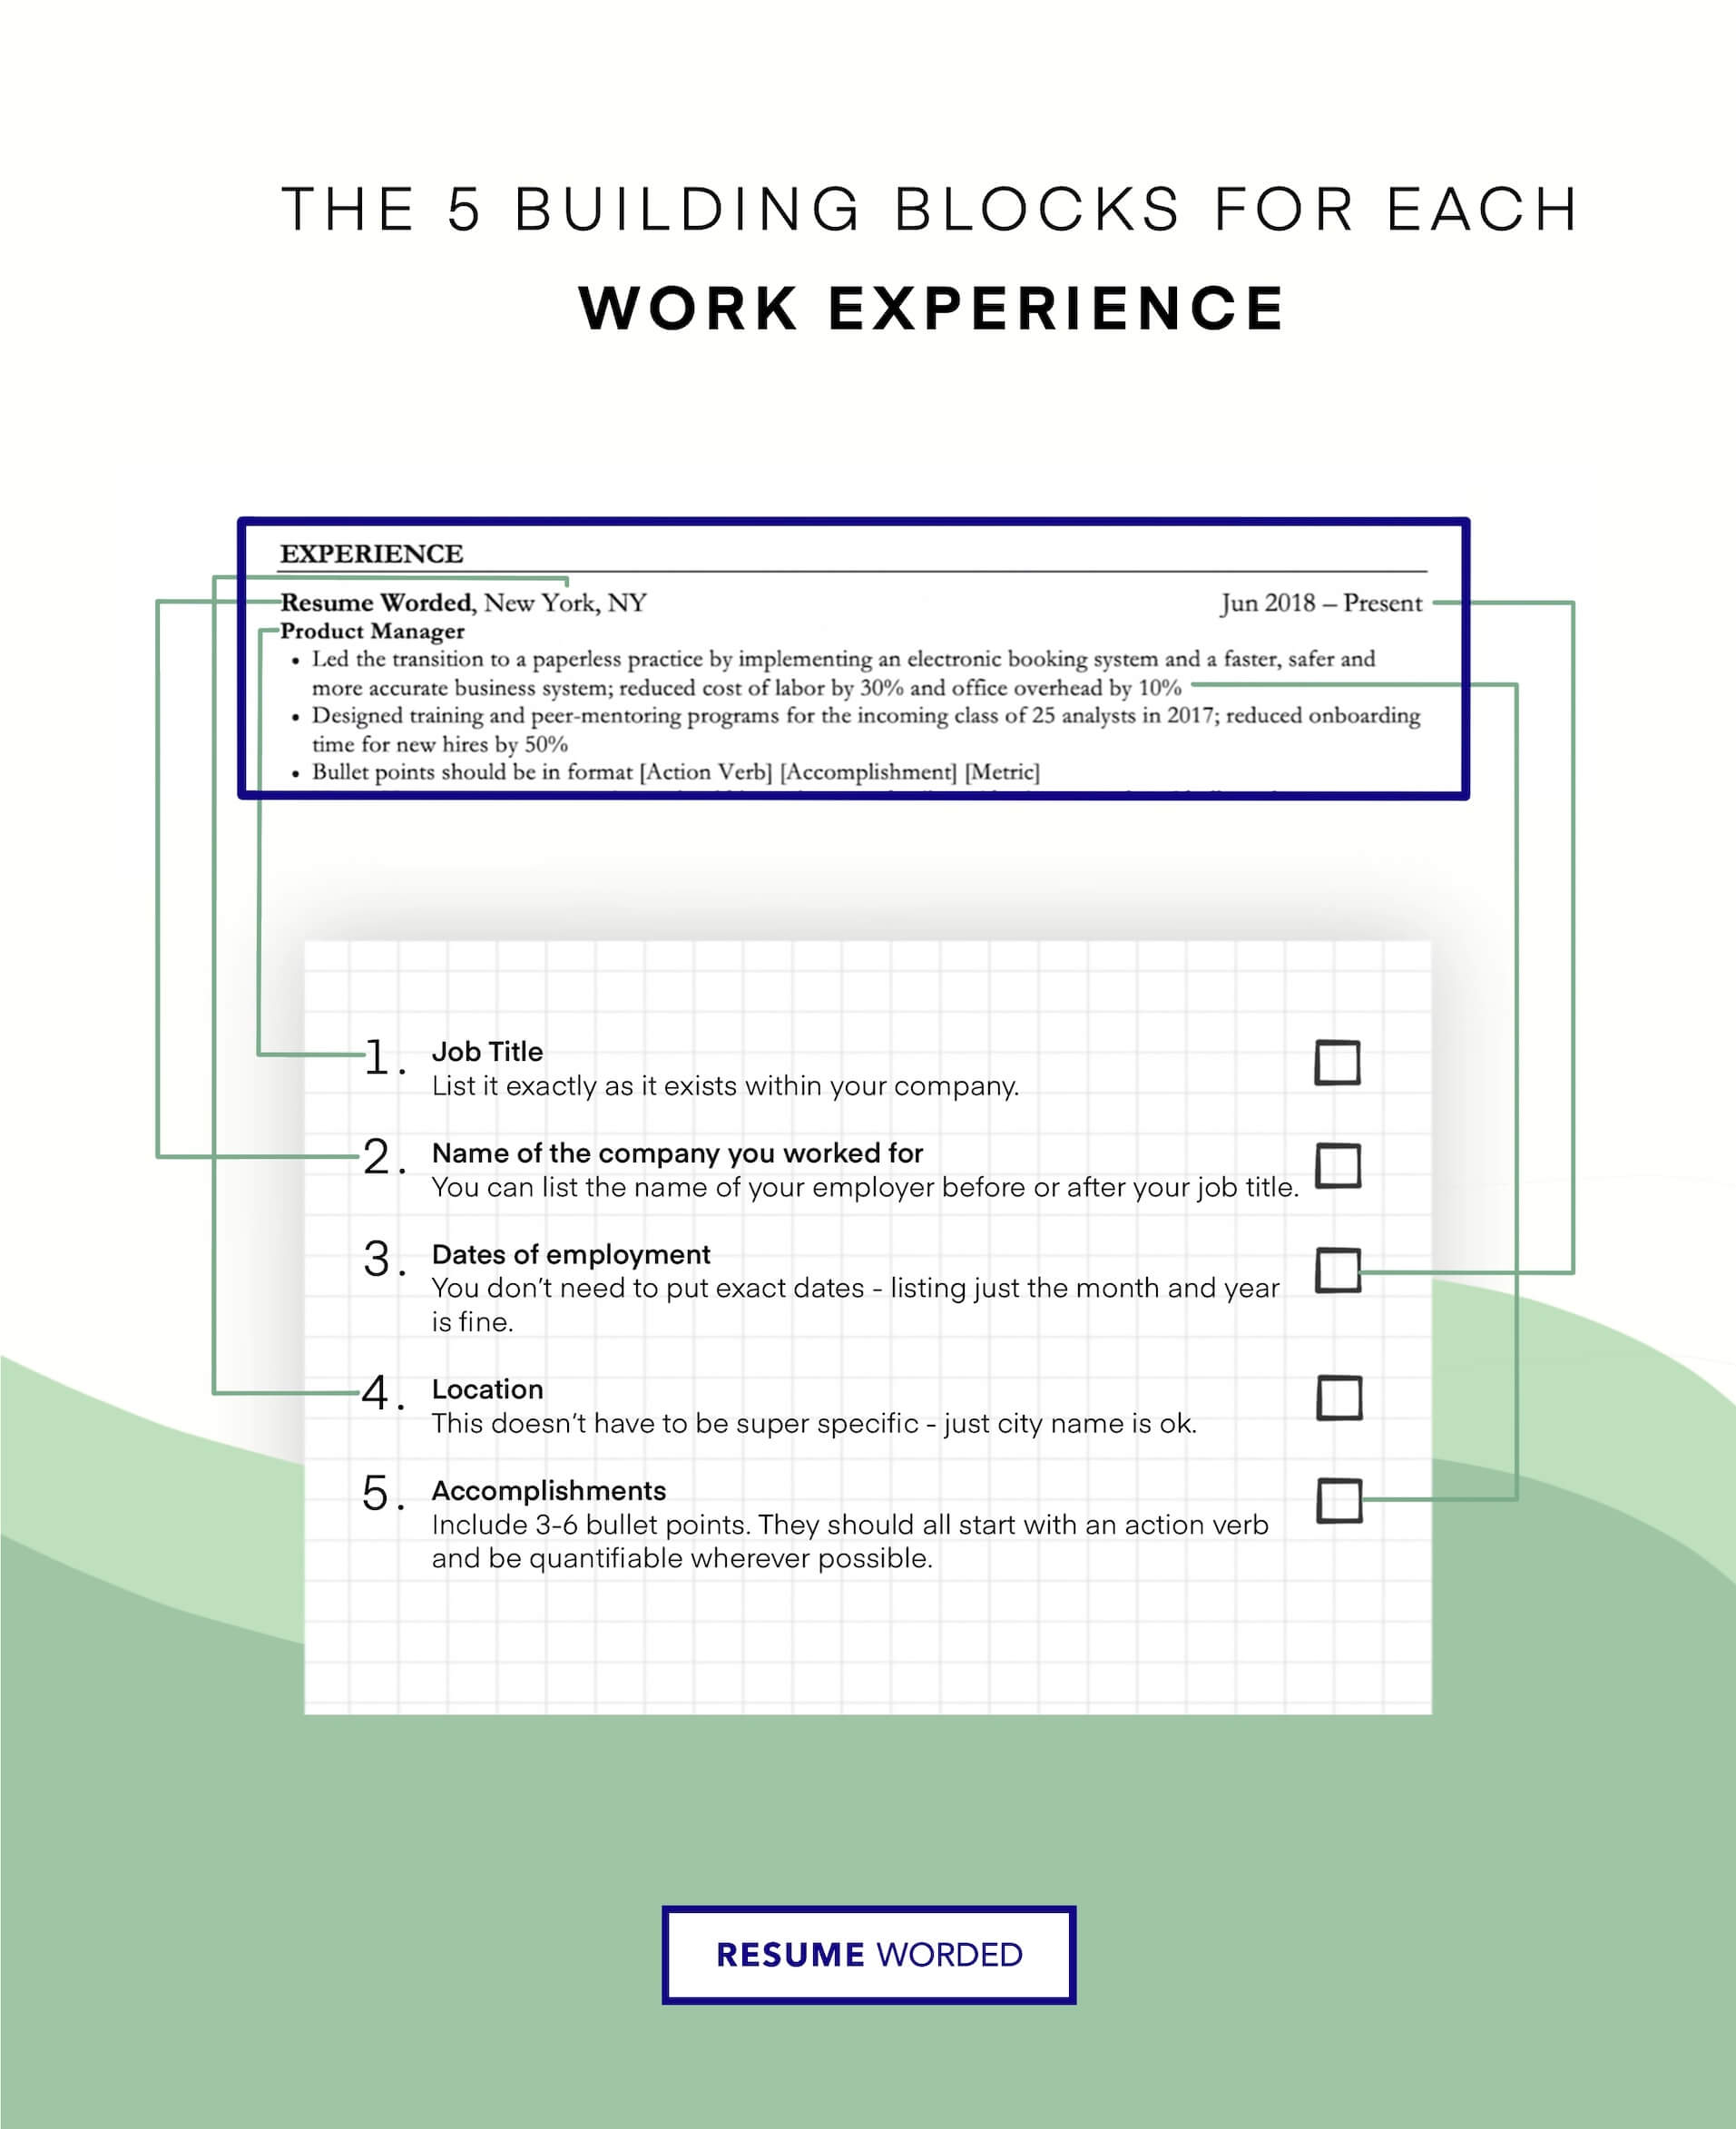 Stress transferrable skills from your previous experiences - Career Change into Data Science Resume